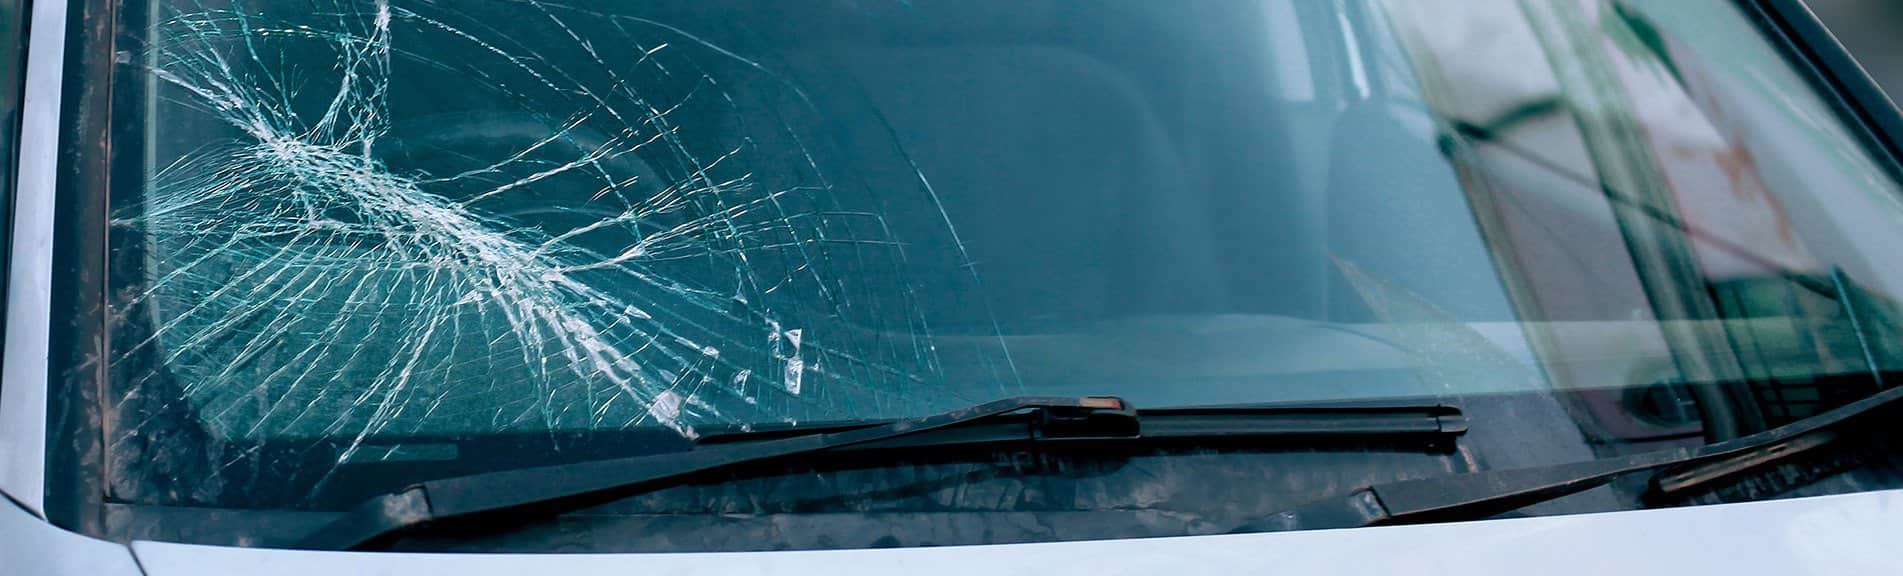 Windshield Replacement Services in Florida